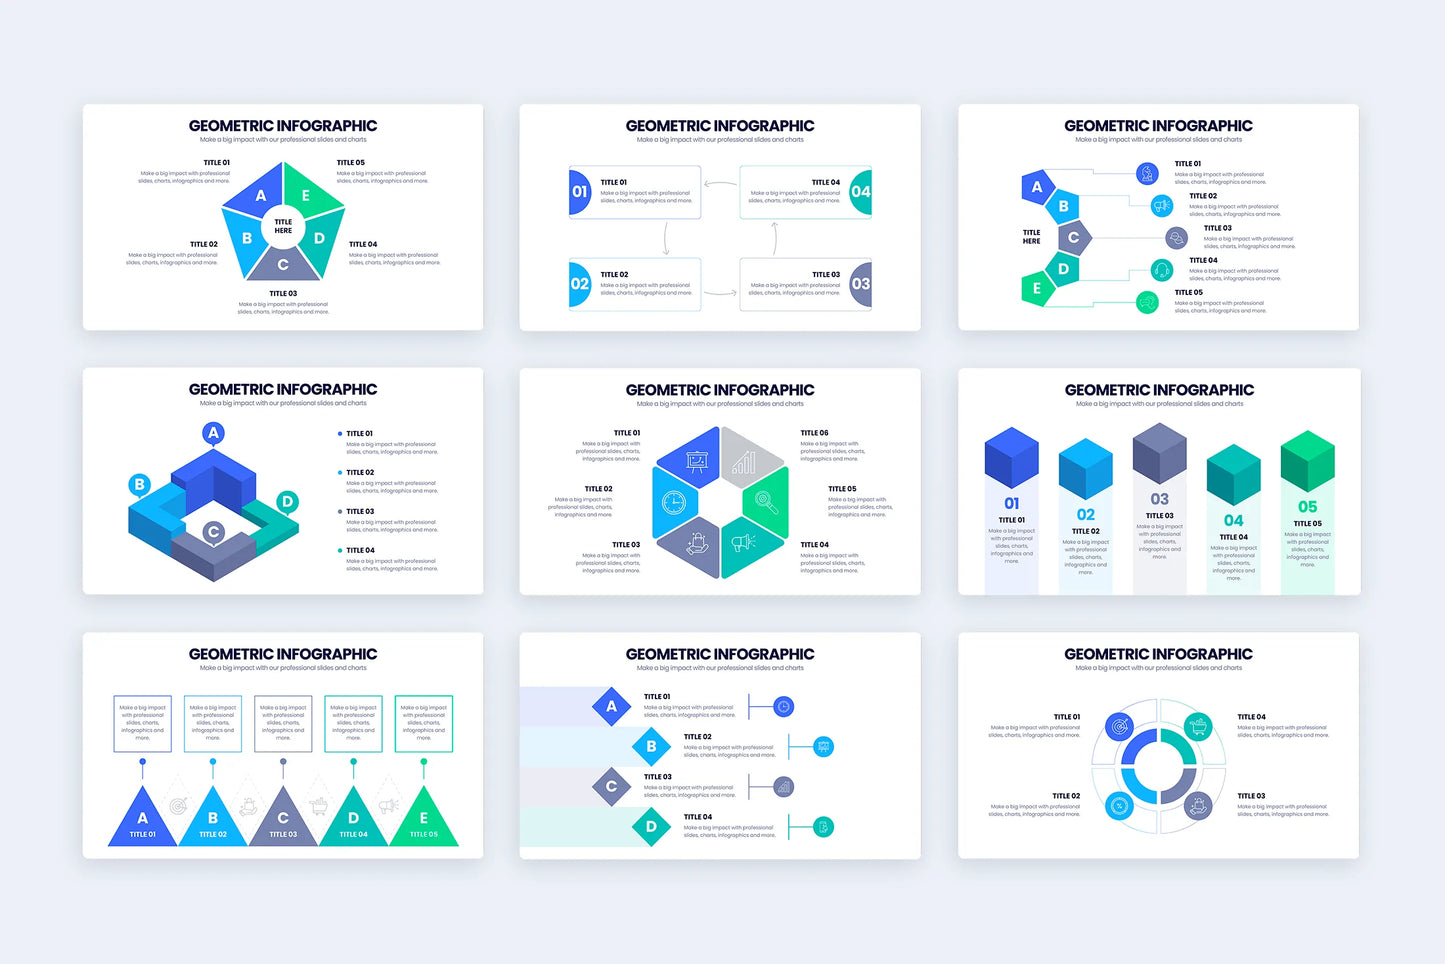 Geometric Infographic Templates PowerPoint slides